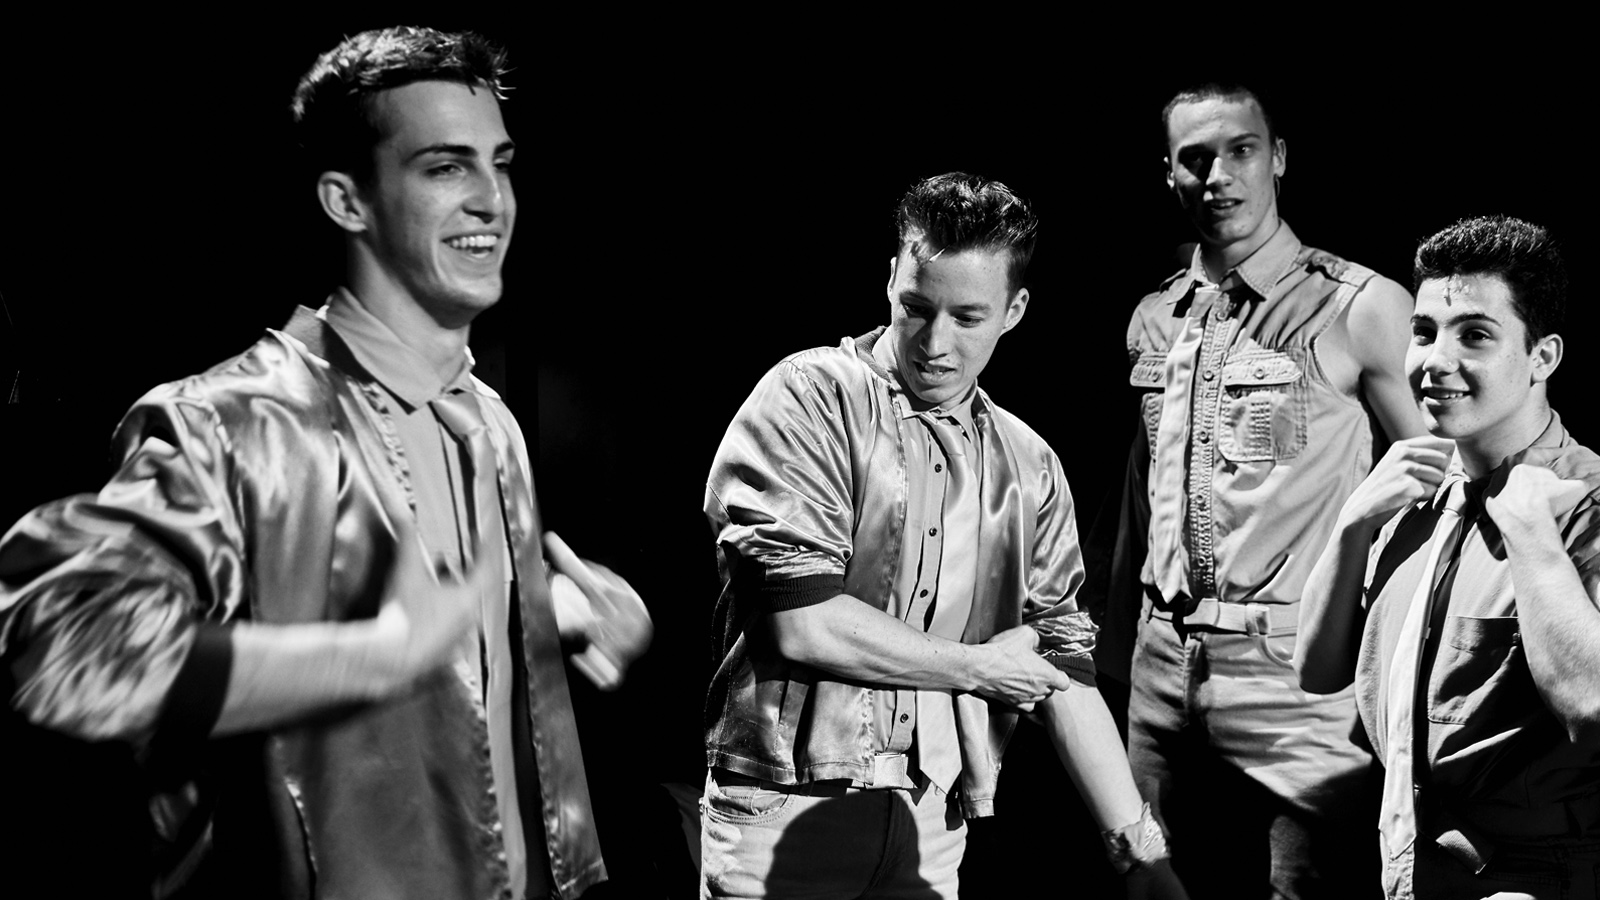 A group of four young men with slicked back hair, smiling.